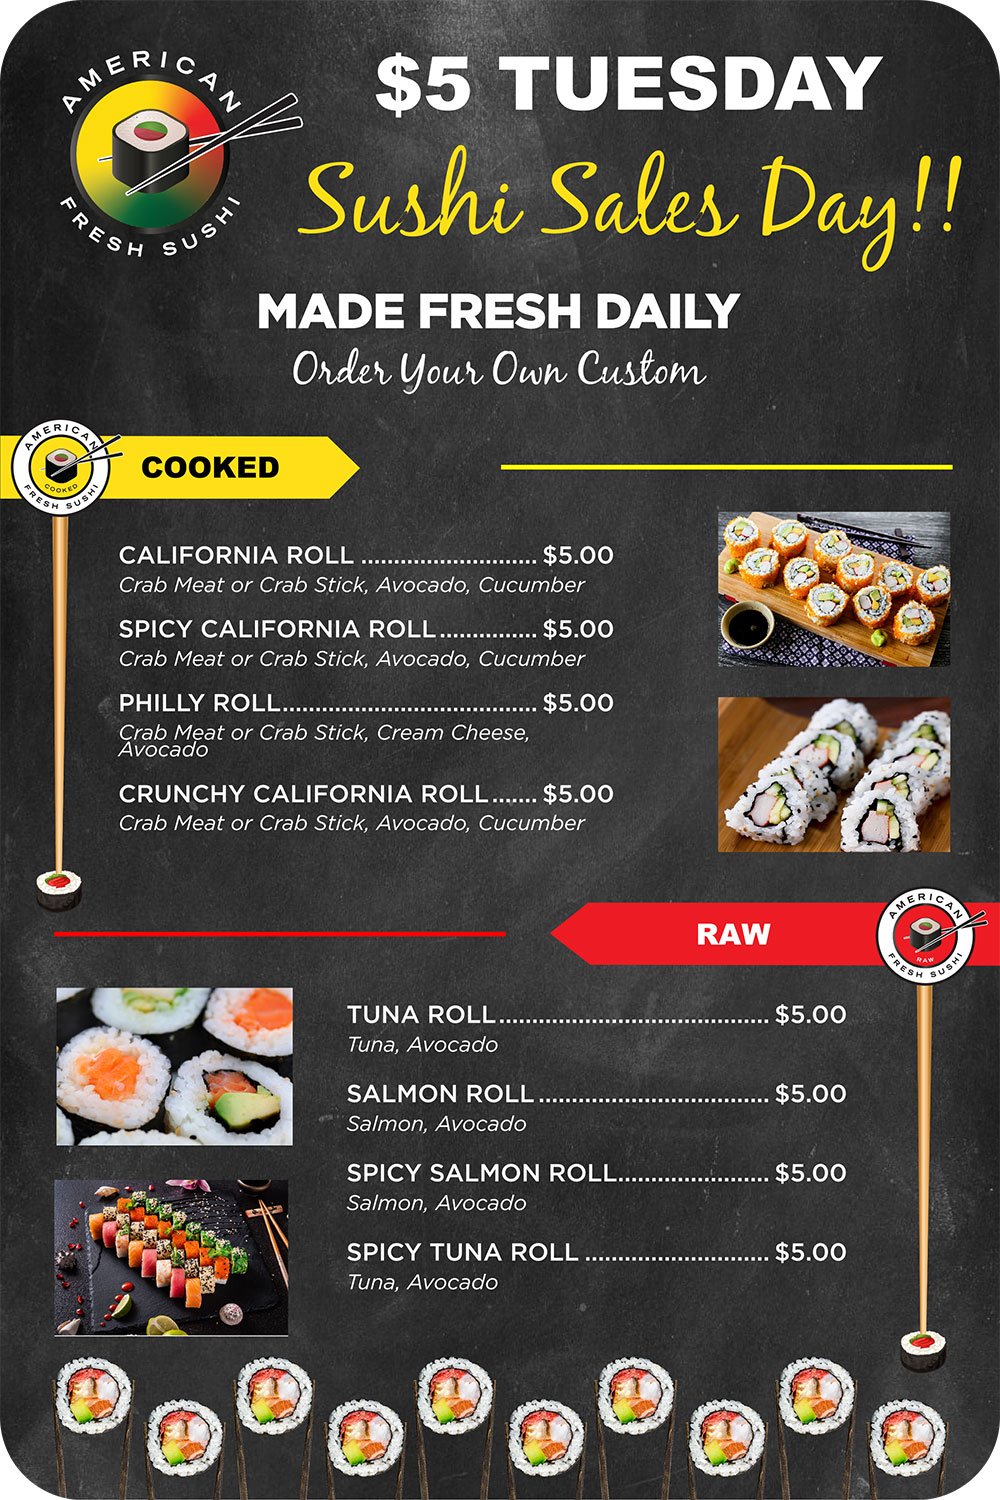 $5 Tuesday sushi sales day